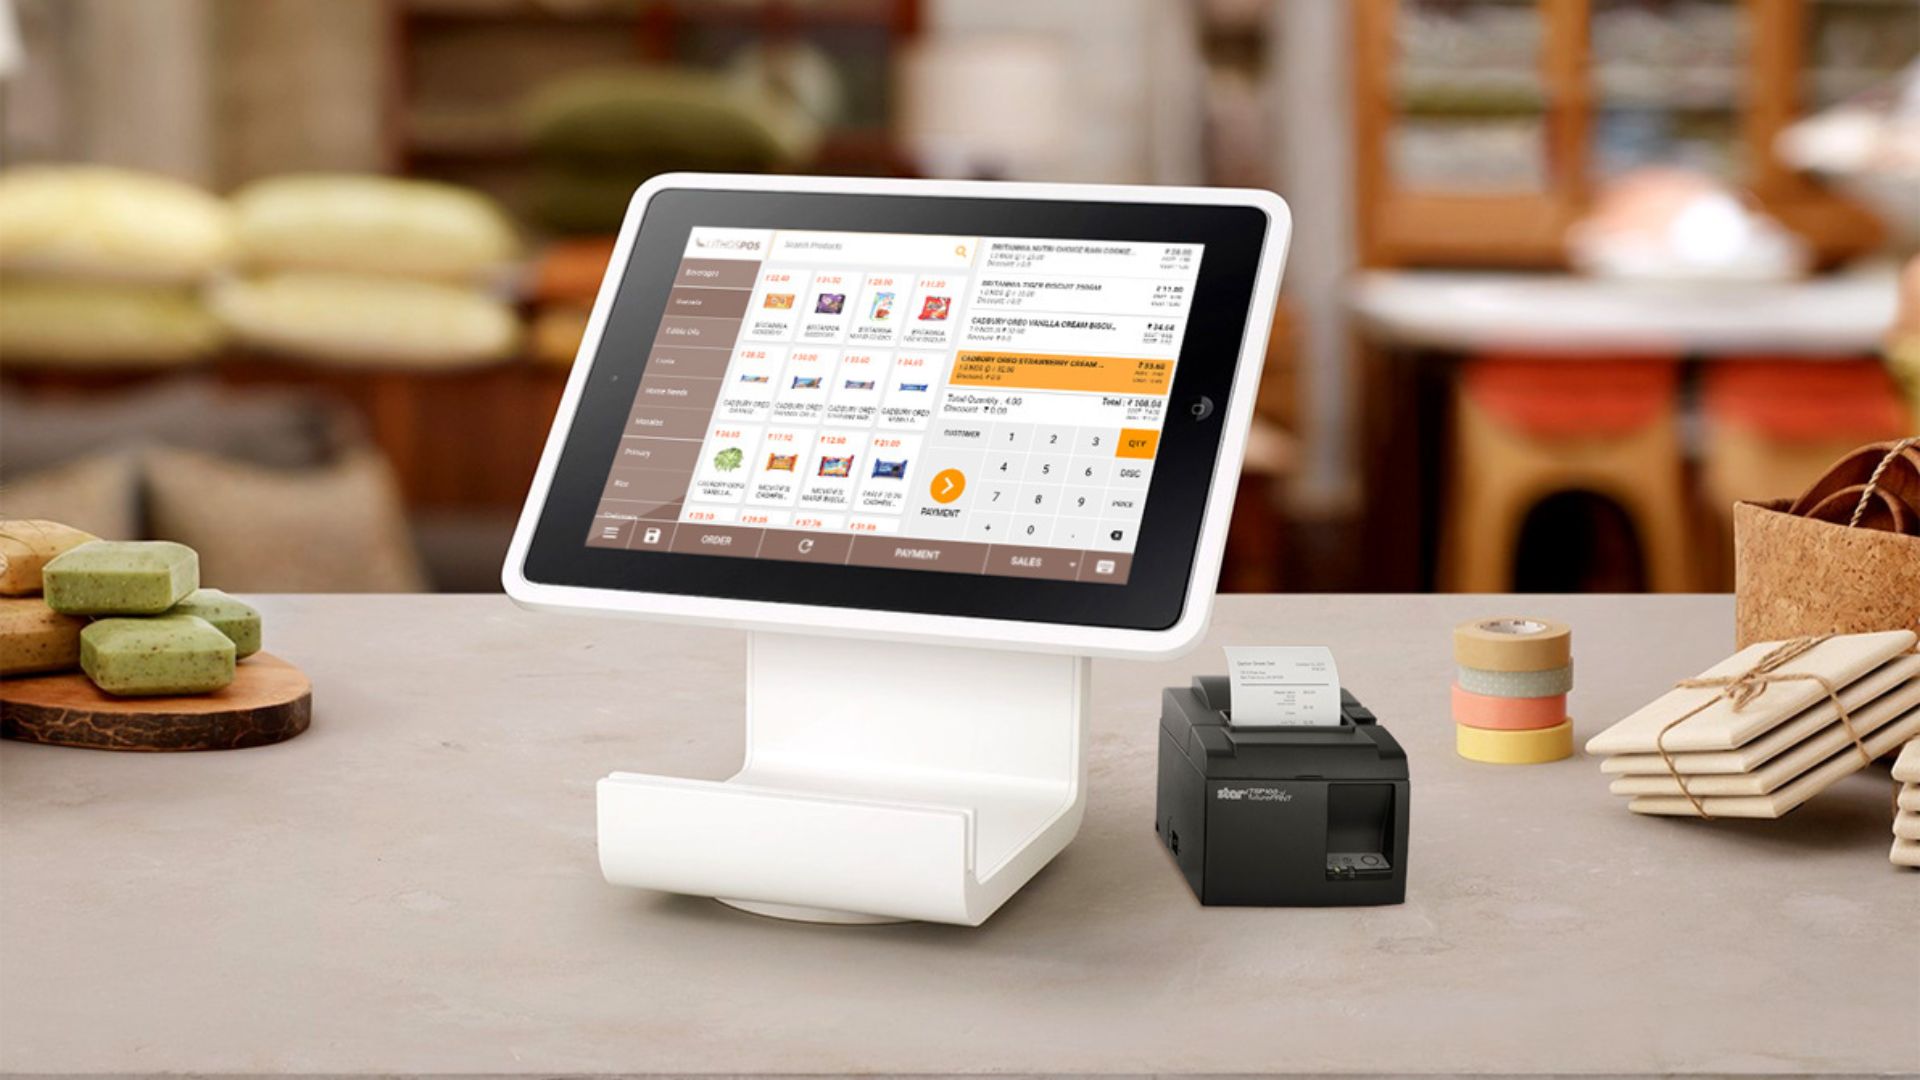 this image shows a POS System for a Catering Business